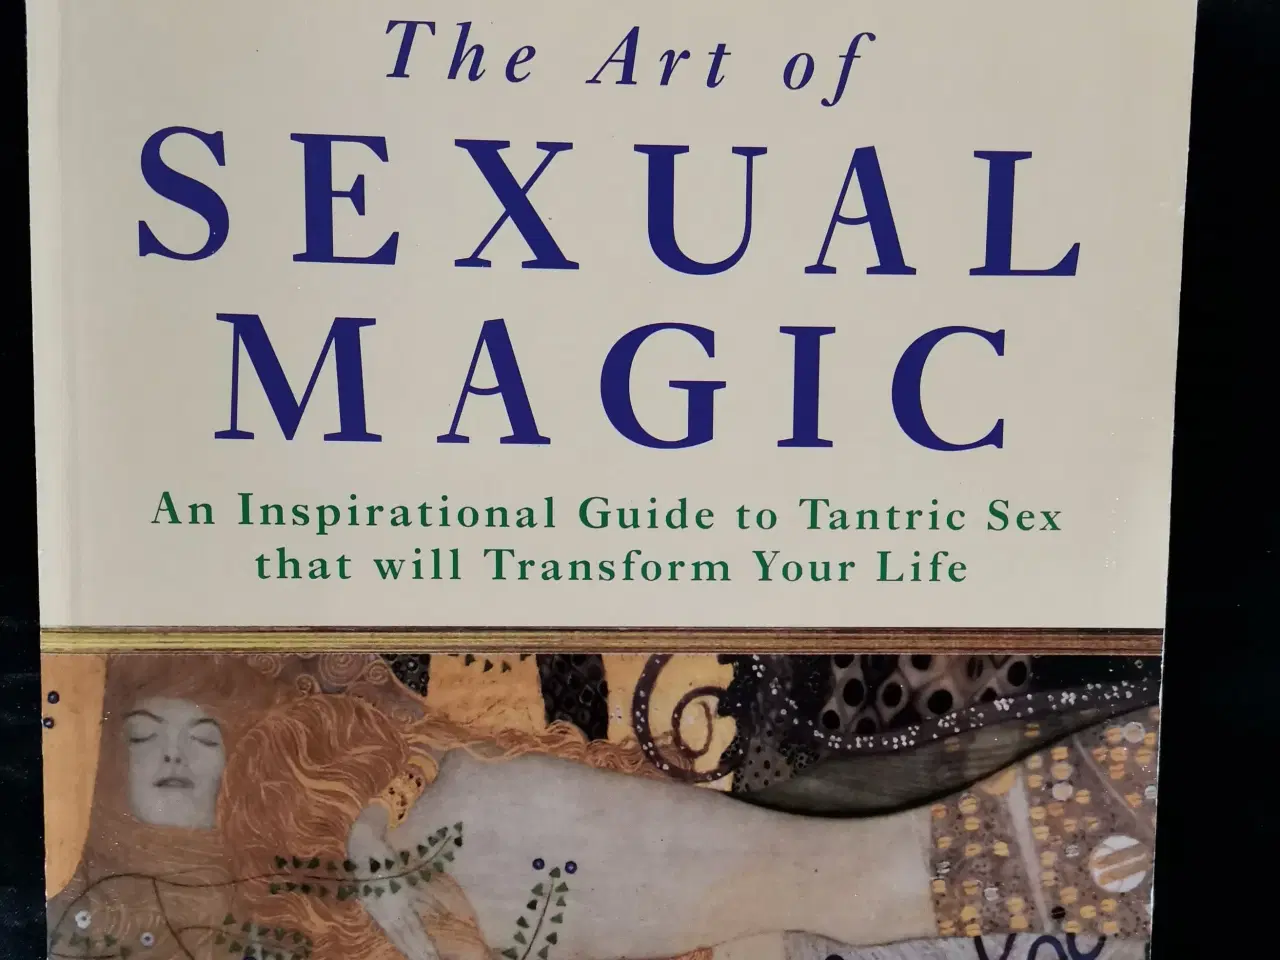 Billede 1 - The Art of Sexual Magic, Margo Anand